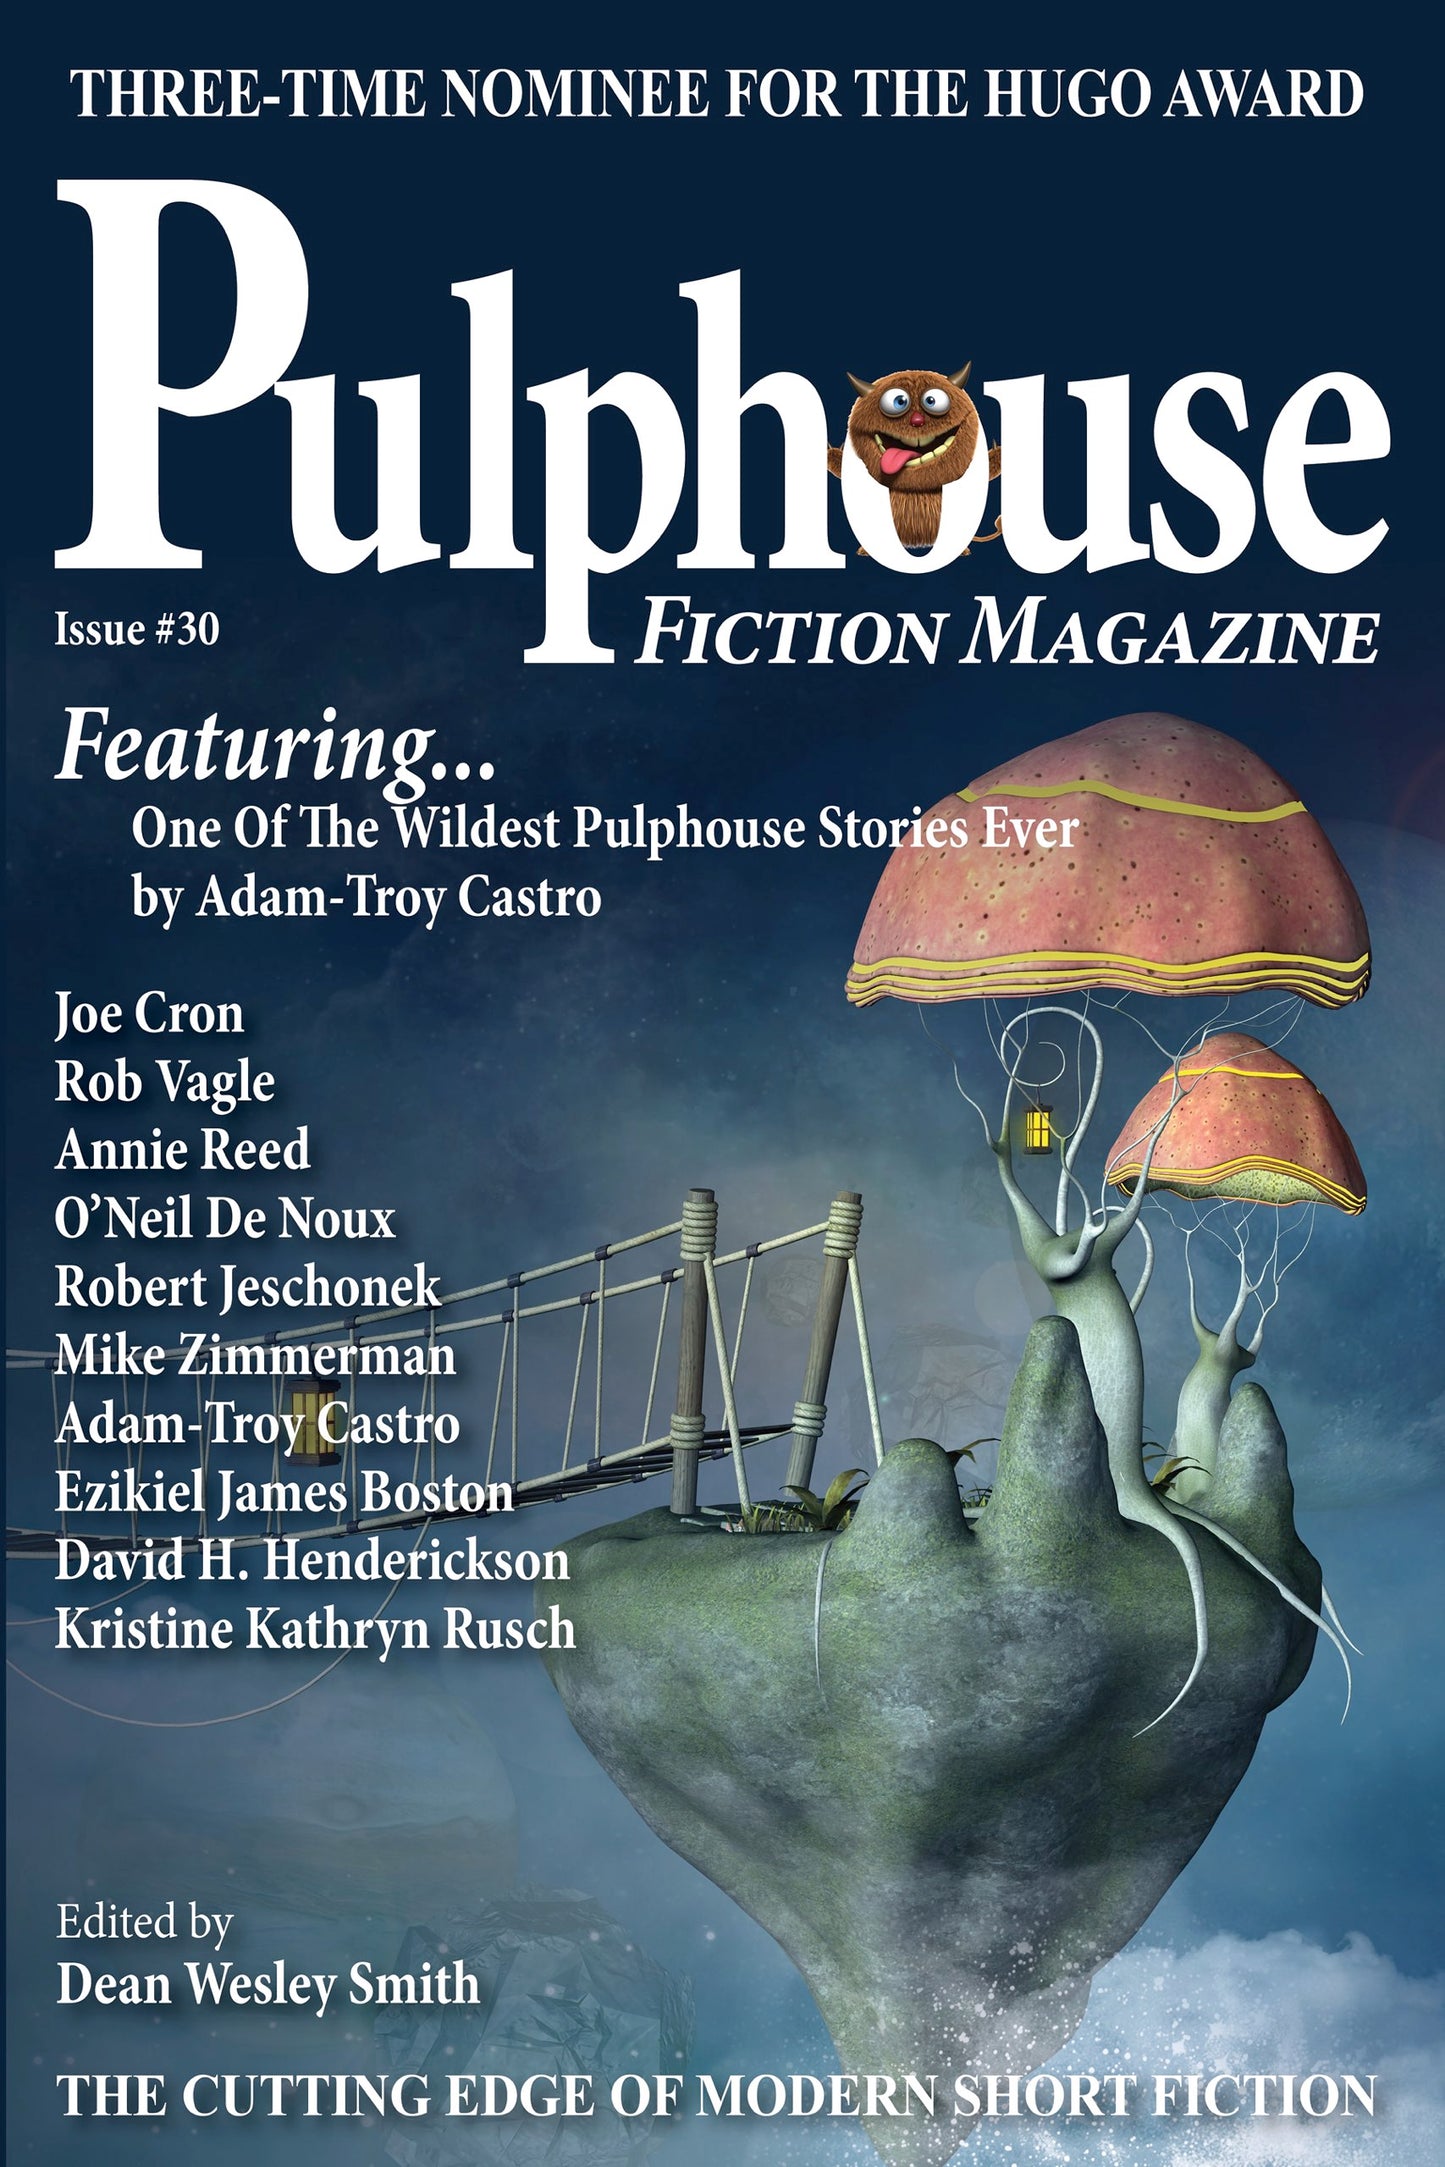 Pulphouse Fiction Magazine: Issue #30 Edited by Dean Wesley Smith